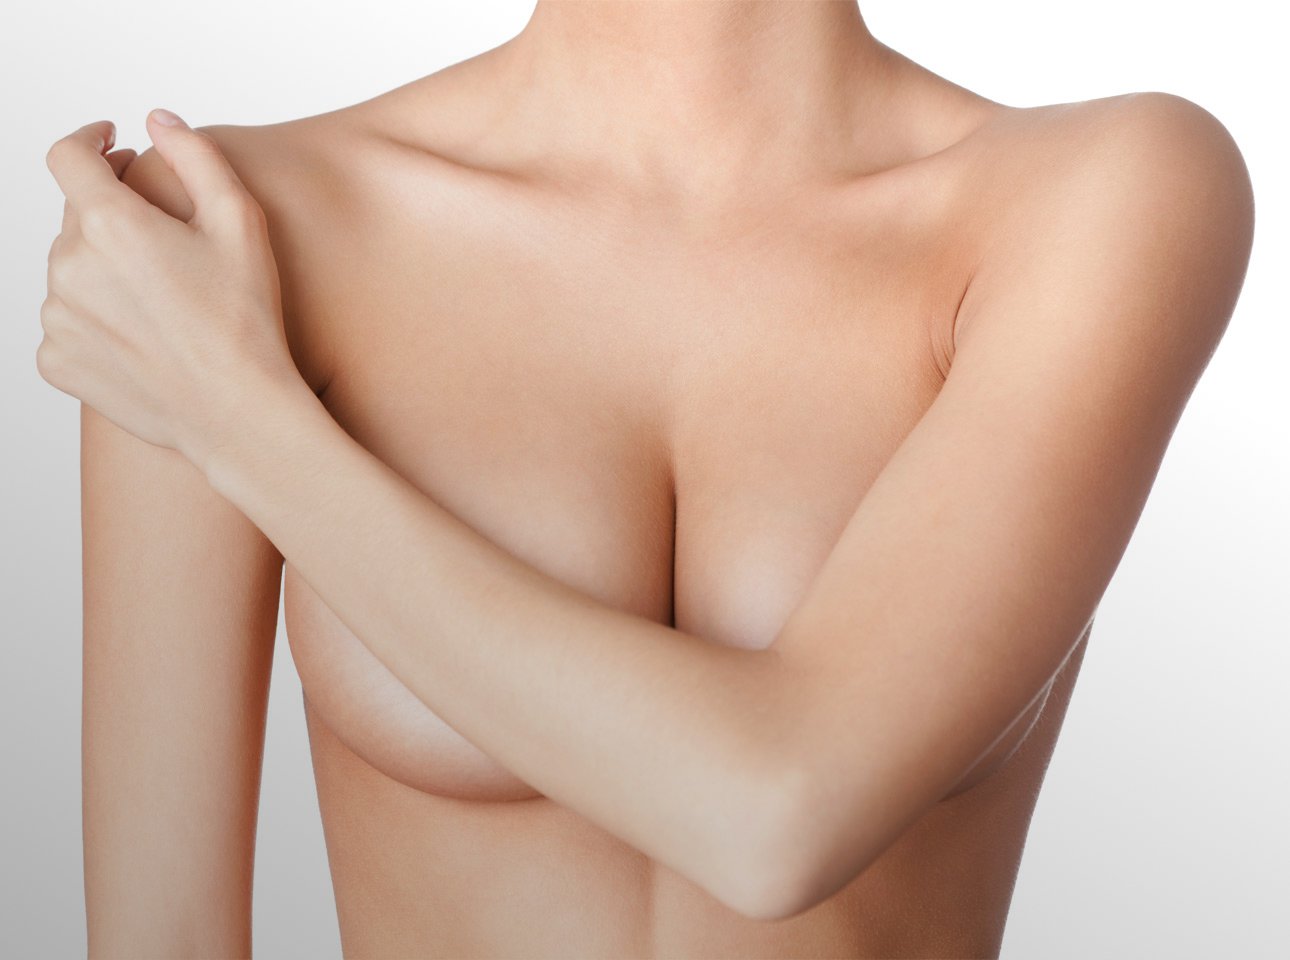 bare chested breast plastic surgery patient model with harm covering her breasts